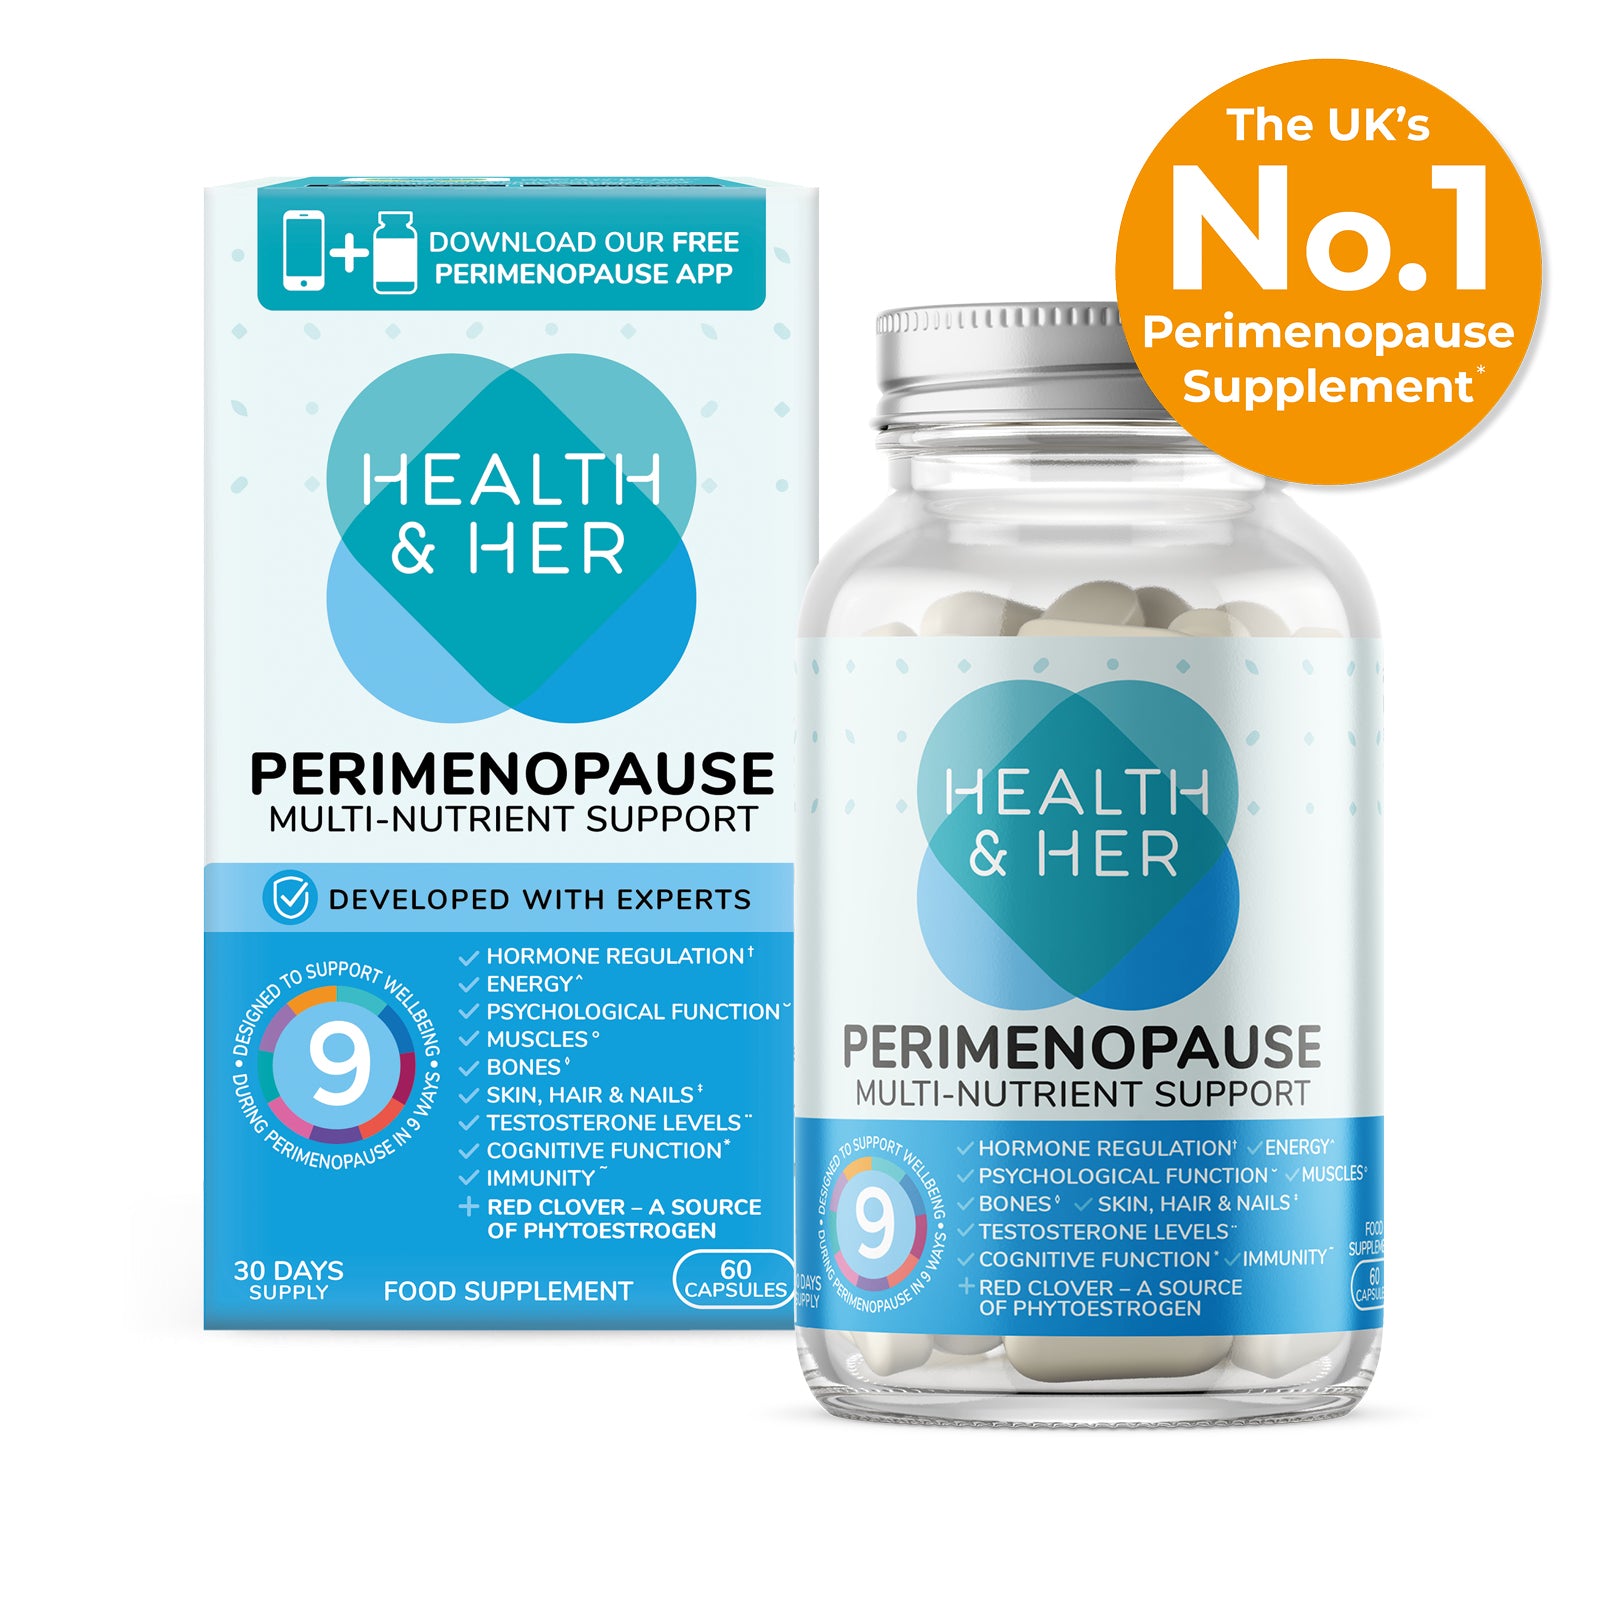 Health & Her Perimenopause Multi-Nutrient Support Supplement